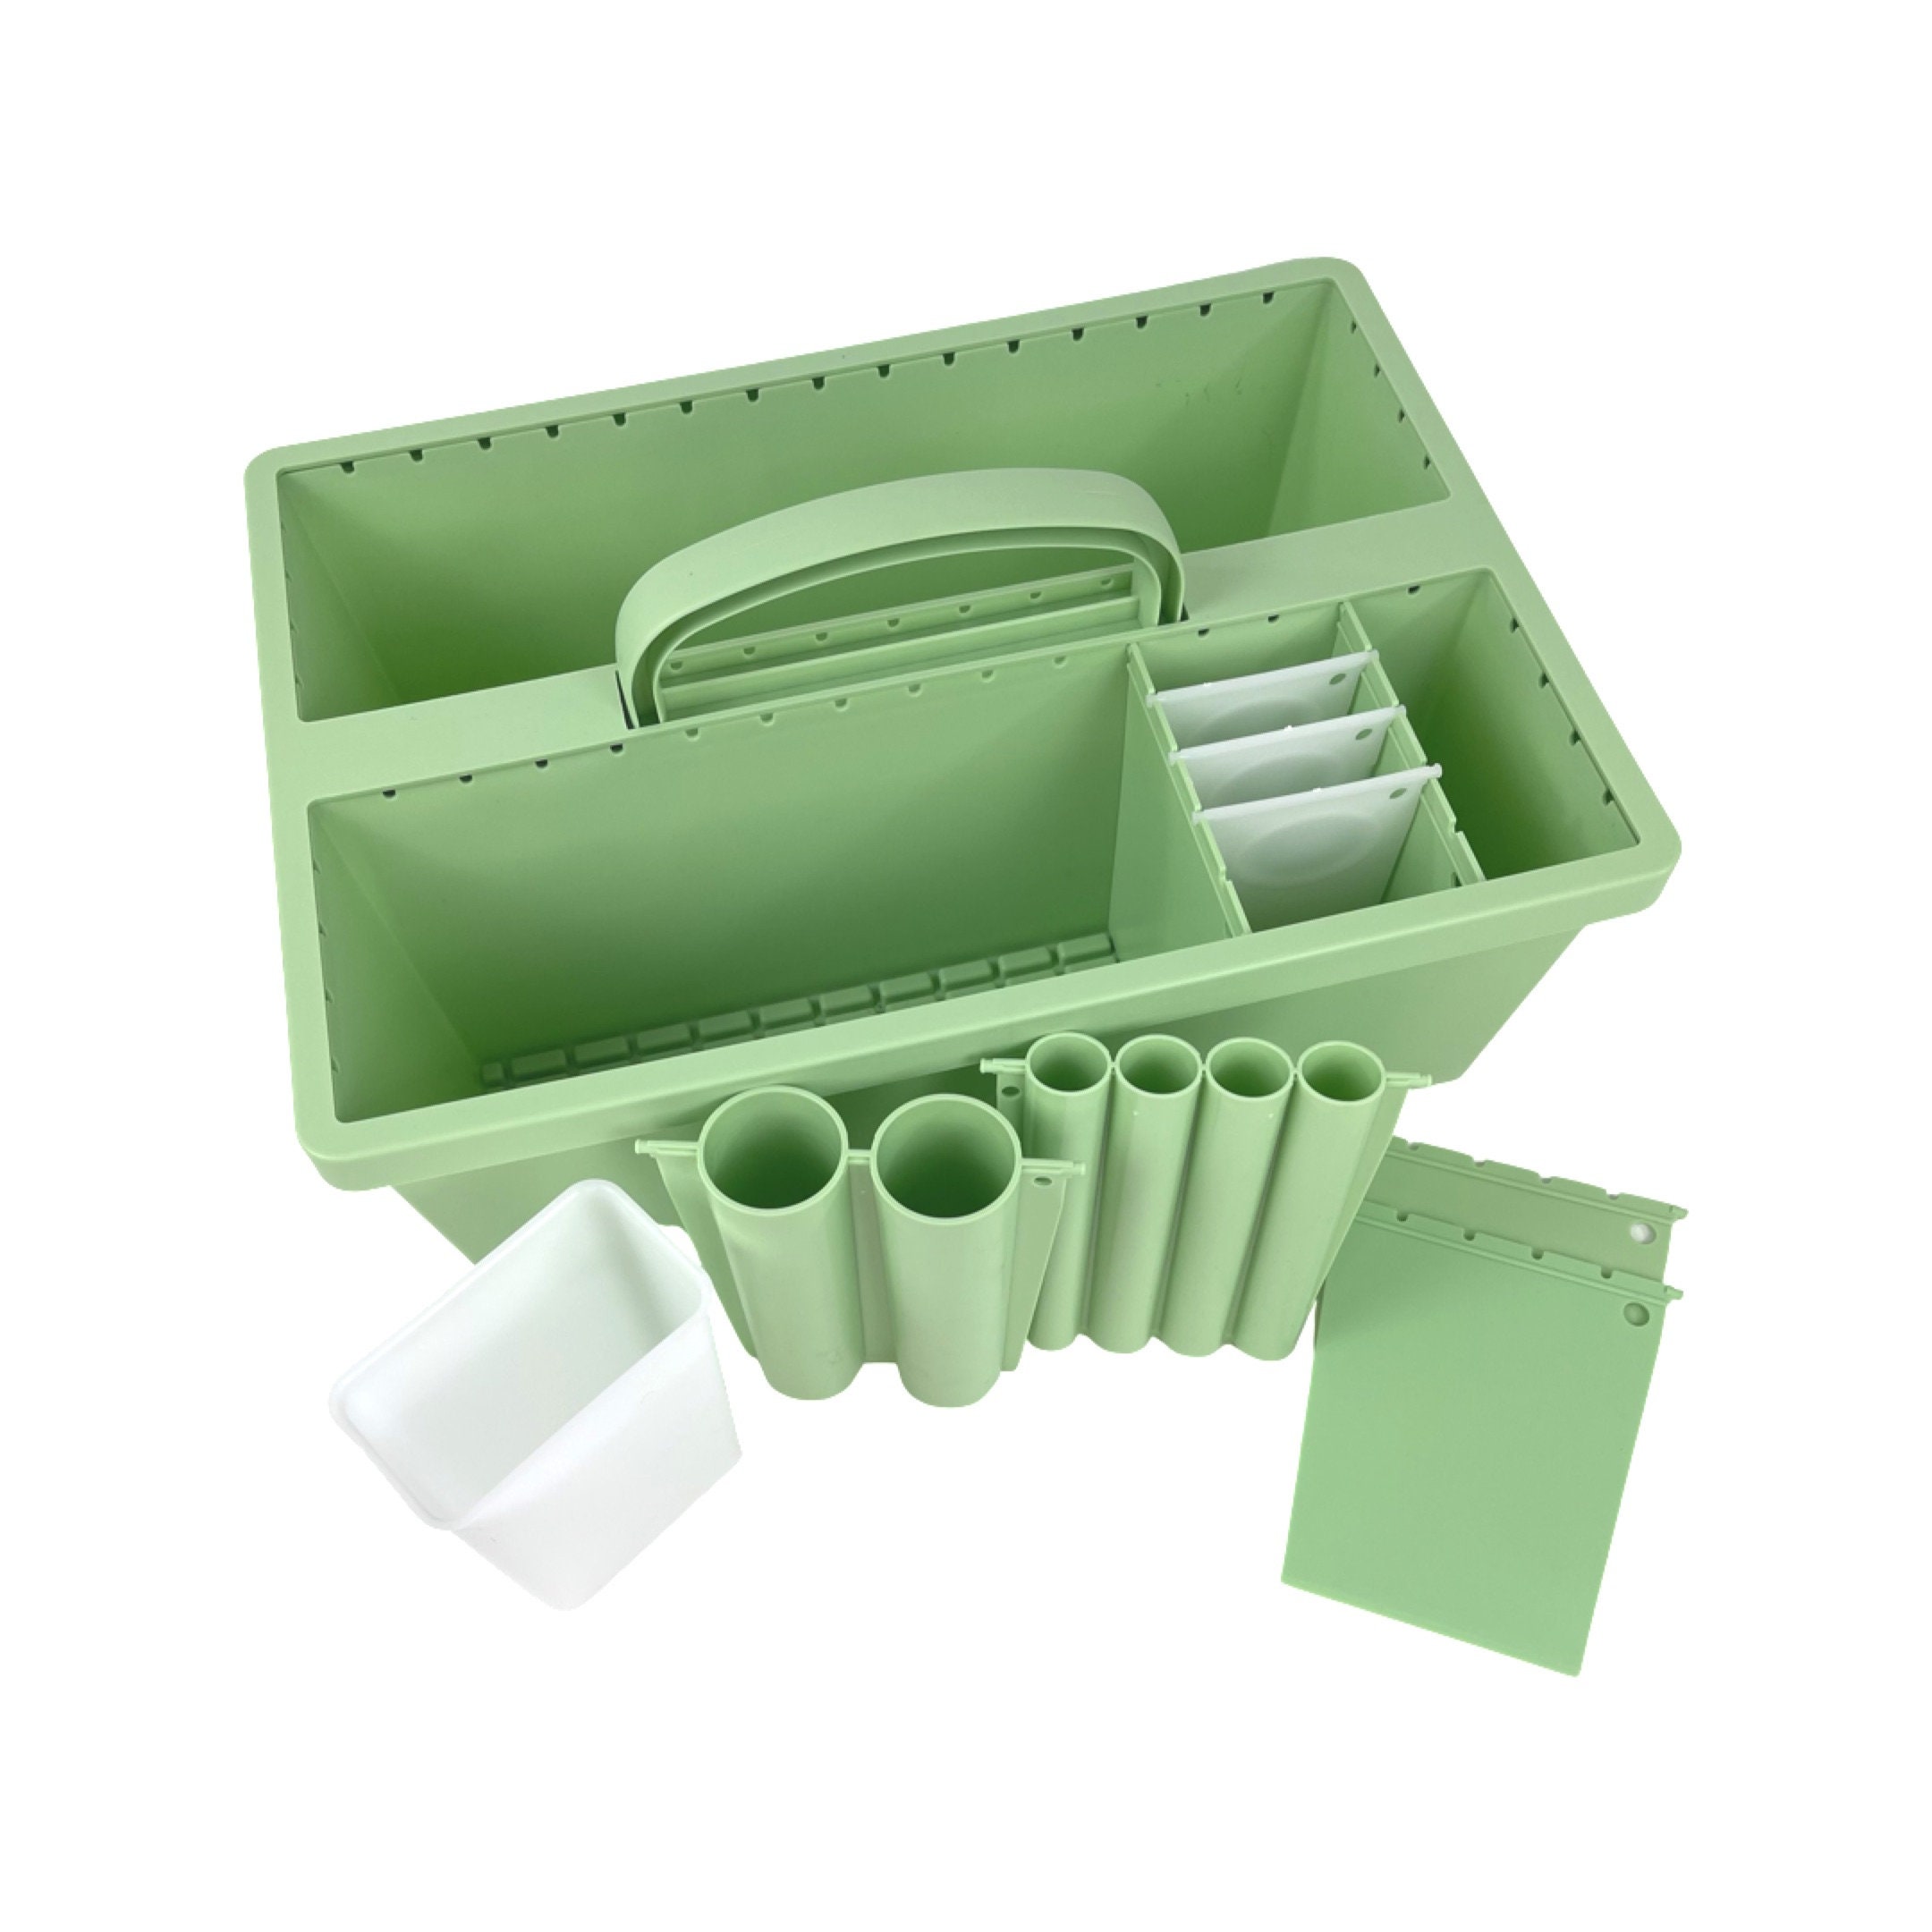 Tote Cleaning Caddy with Dividers for Cleaning Supplies Cleaning Bag